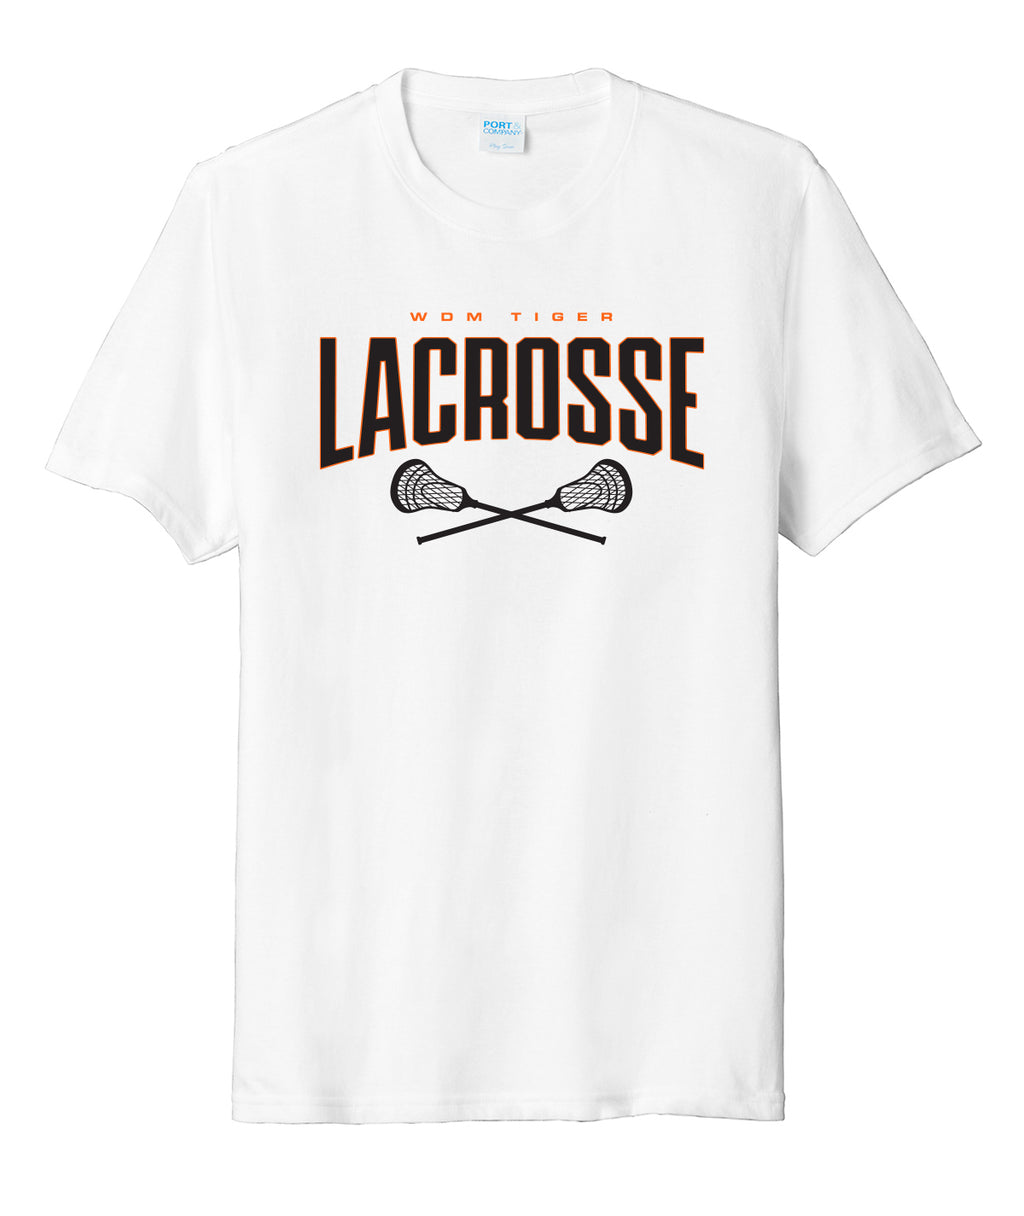 WDM Tiger Lacrosse Softstyle Tee